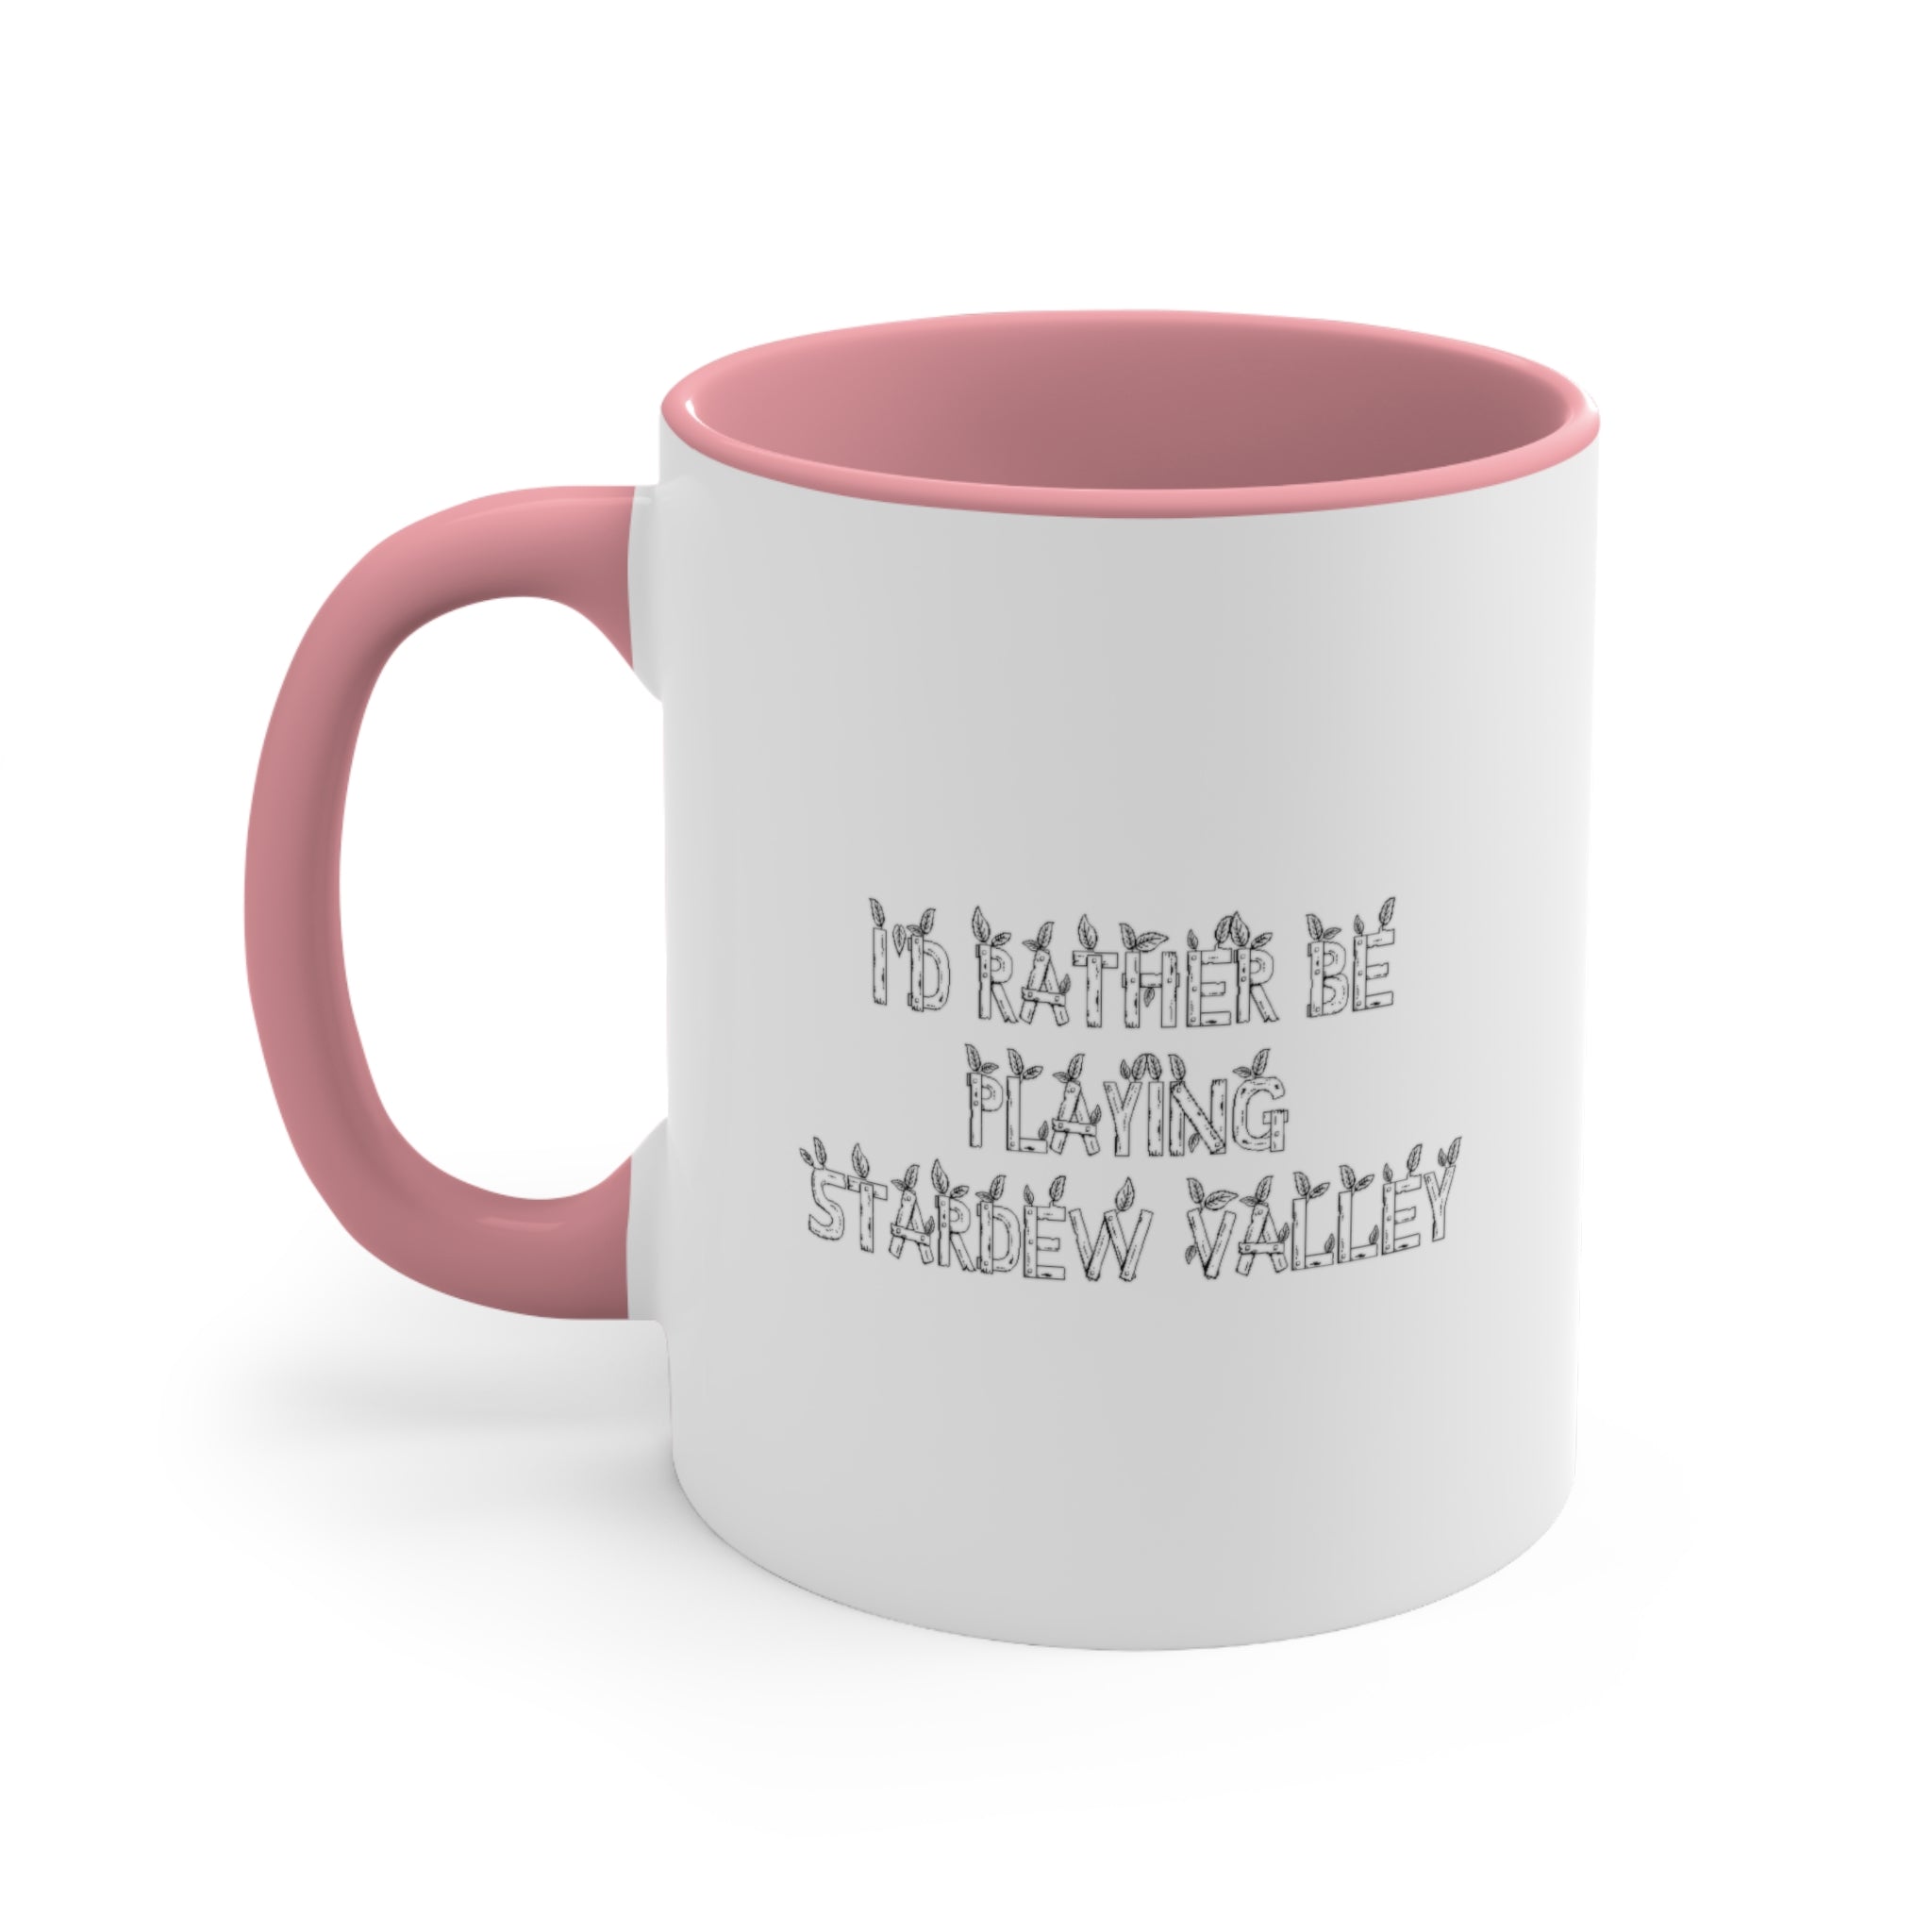 Stardew Valley I'd Rather Be Playing Coffee Mug, 11oz